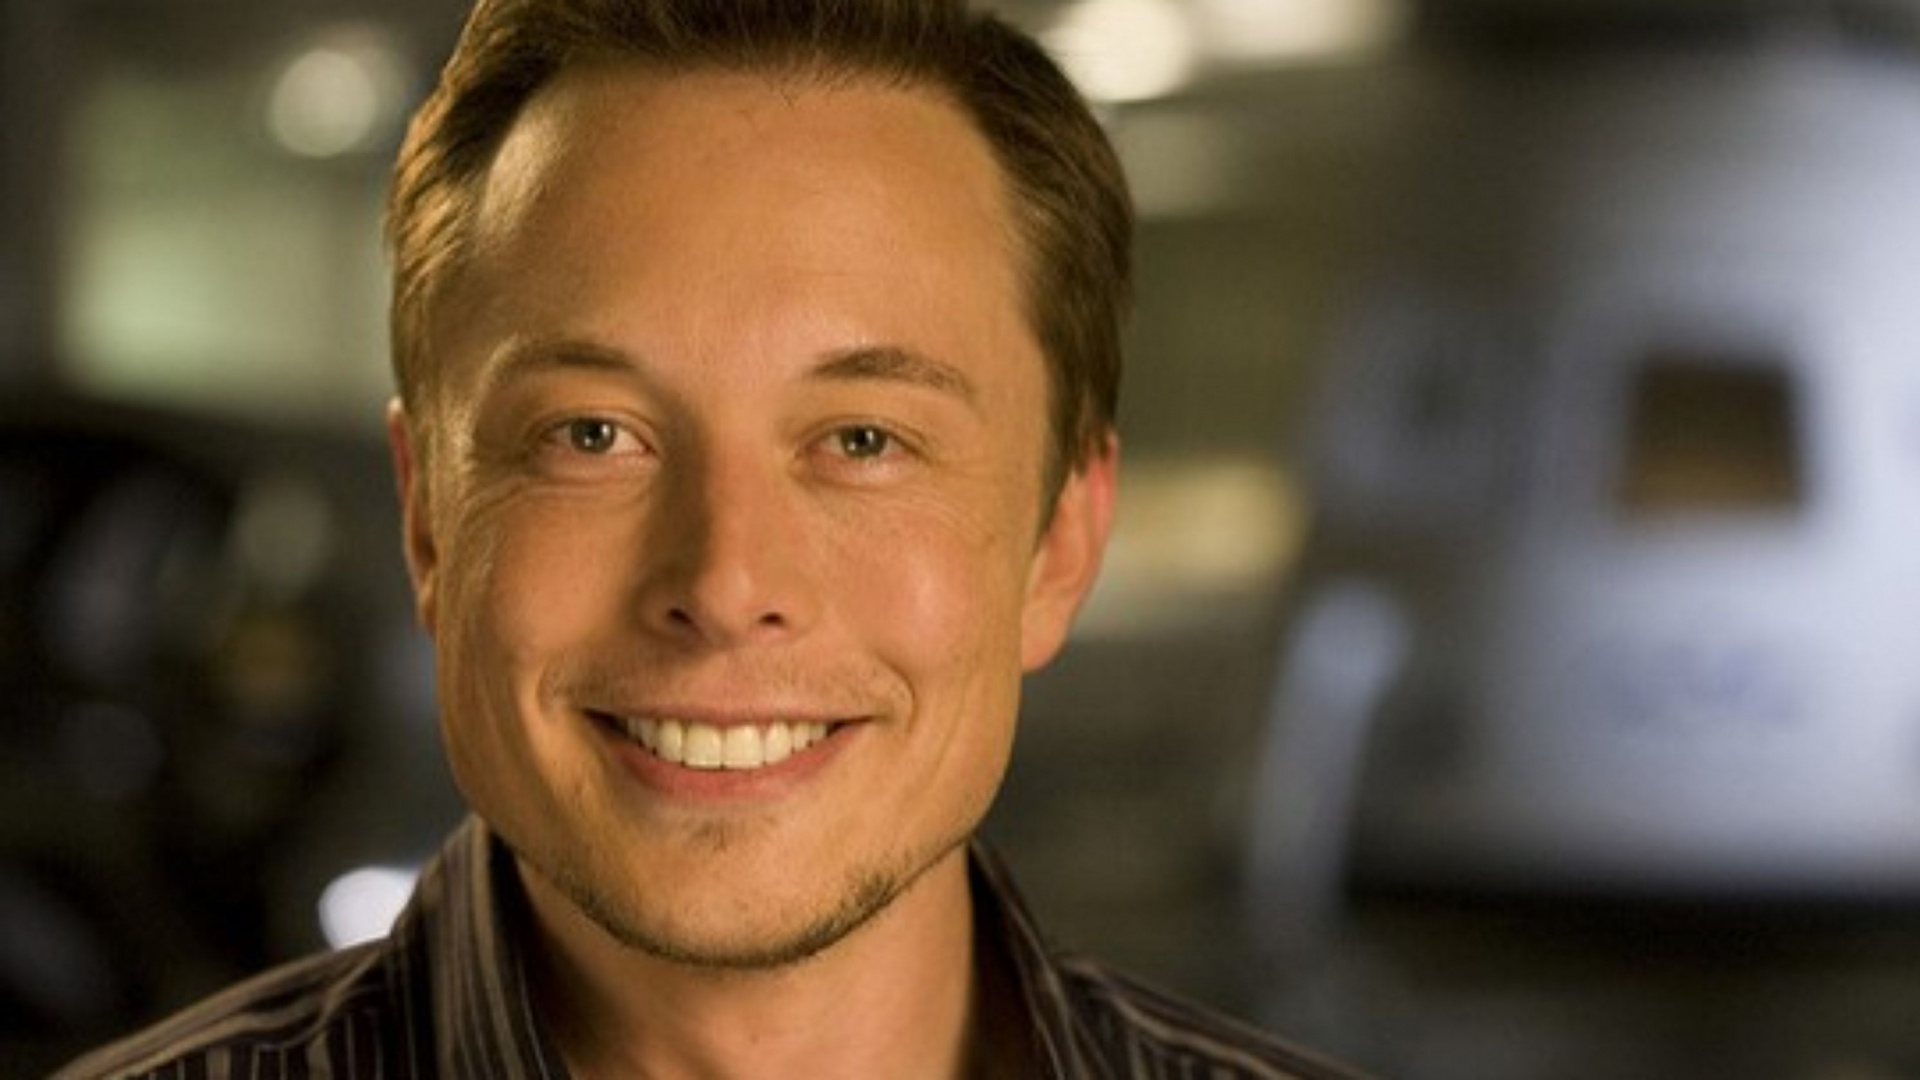 Elon Musk, Face, Facial Expression, Forehead, Smile. Wallpaper in 1920x1080 Resolution